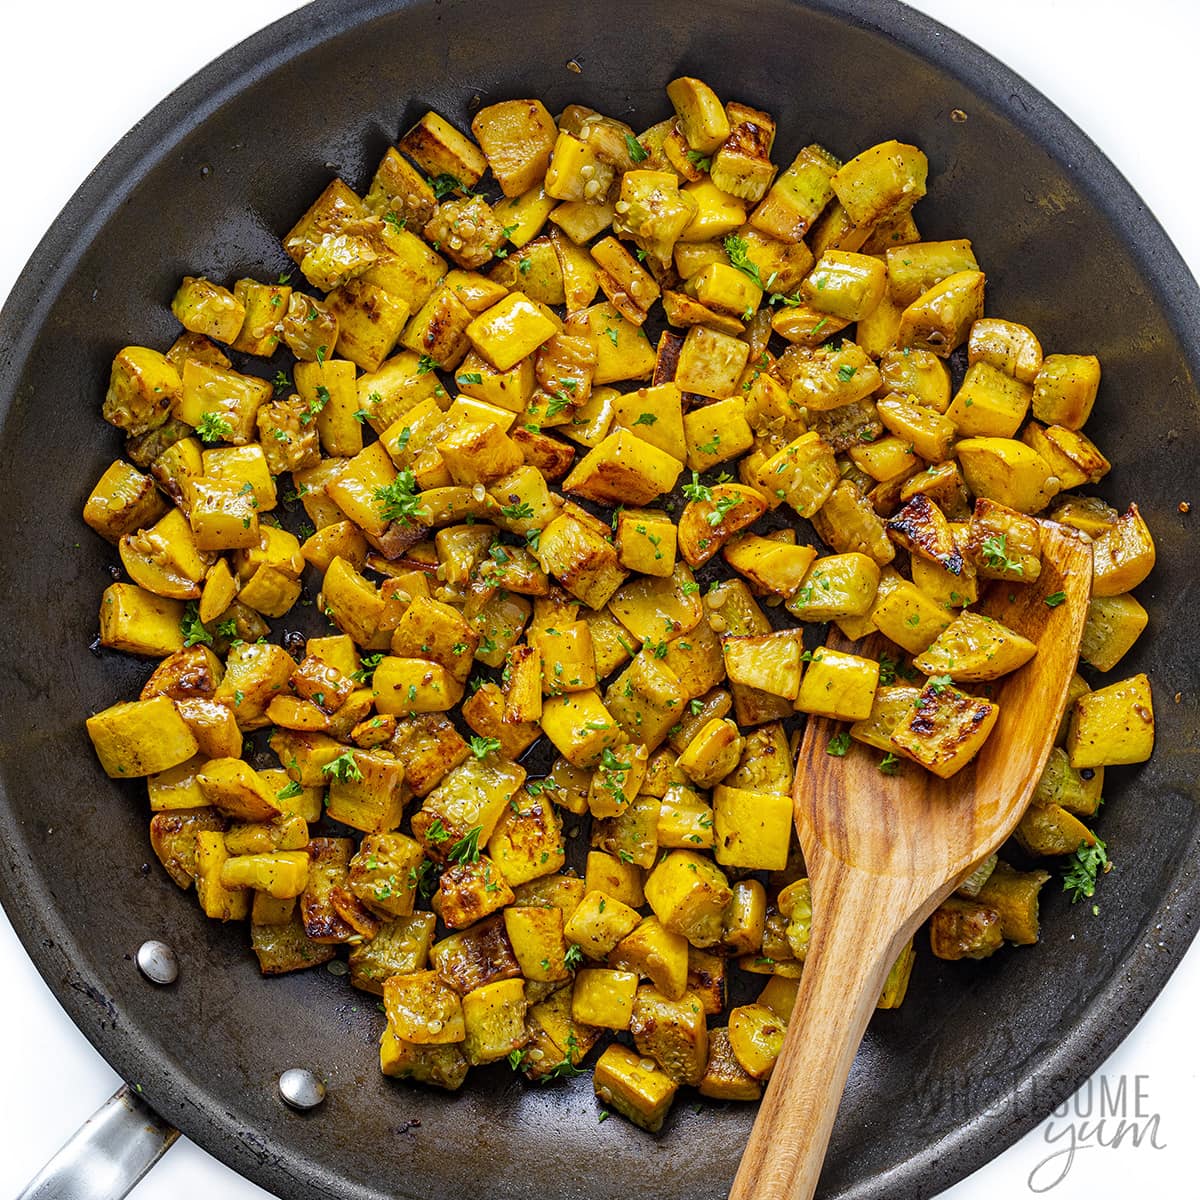 Sauteed yellow squash in a skillet.